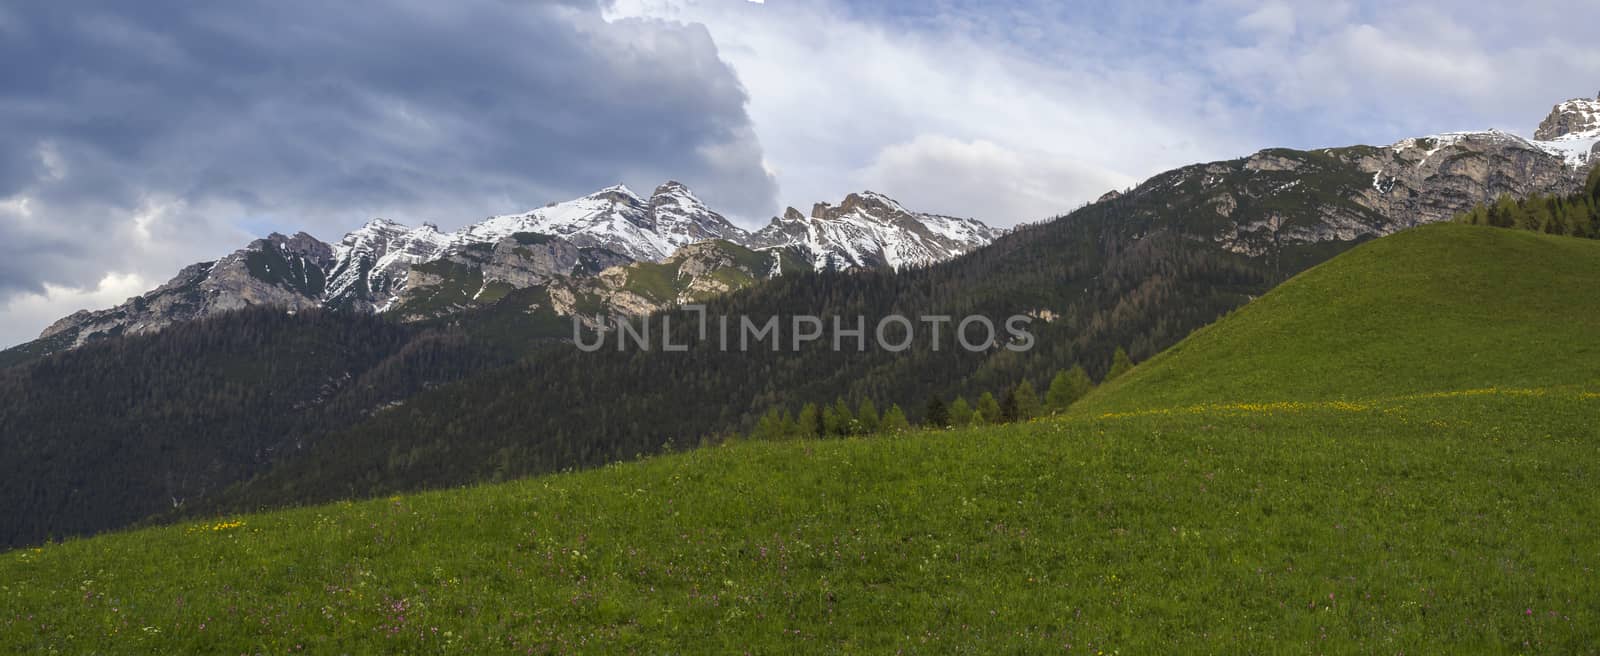 Panoramic landscape of green spring meadow with blooming flowers and trees, forest and snow covered mountain peak in Stubai valley, dramatic clouds.Neustift im Stubaital Tyrol, Austrian Alps.